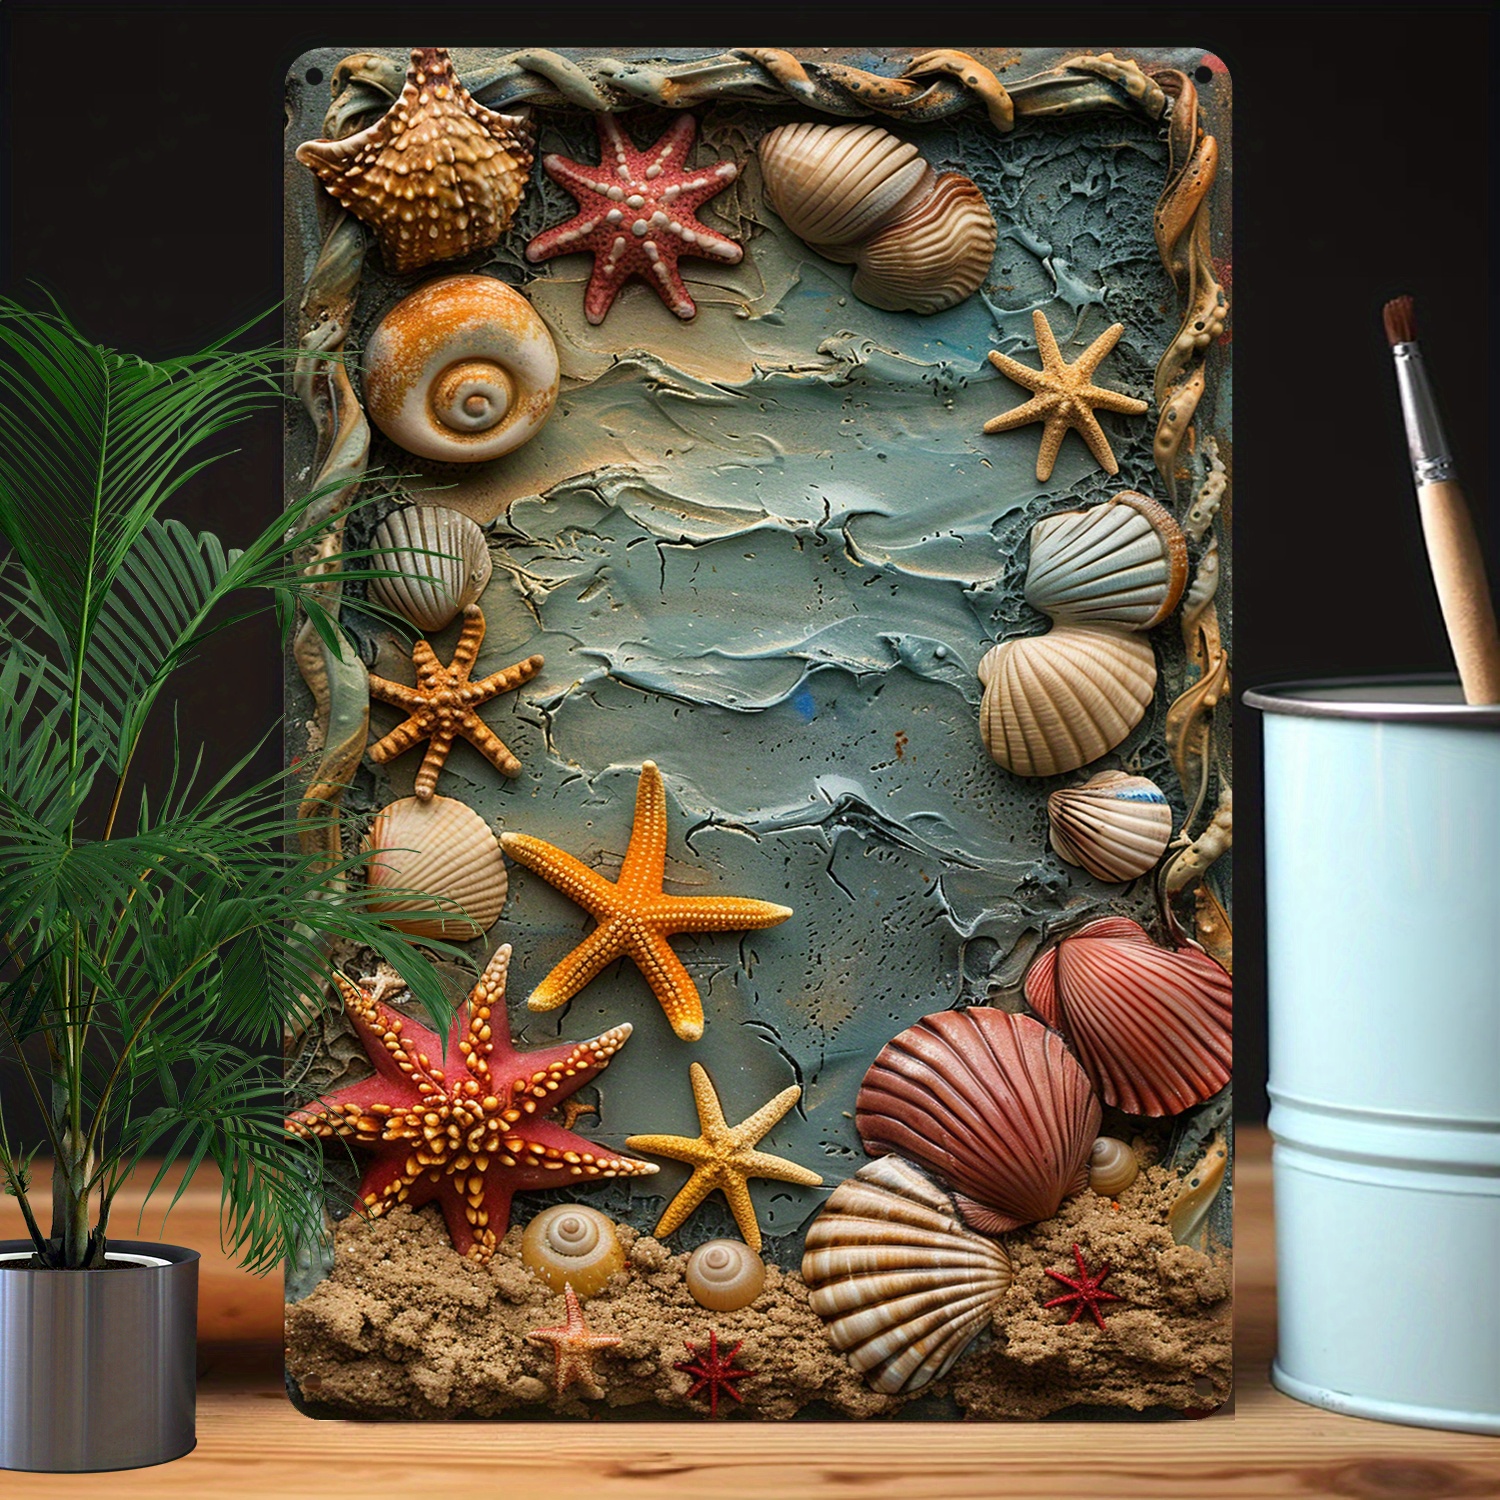 

Starfish And Seashells Aluminum Wall Art - 1pc Durable Metal Decor With 3d Effects, Moisture-resistant Ocean Theme Sign For Home And Office, Enhanced Bending Resistance - A2355